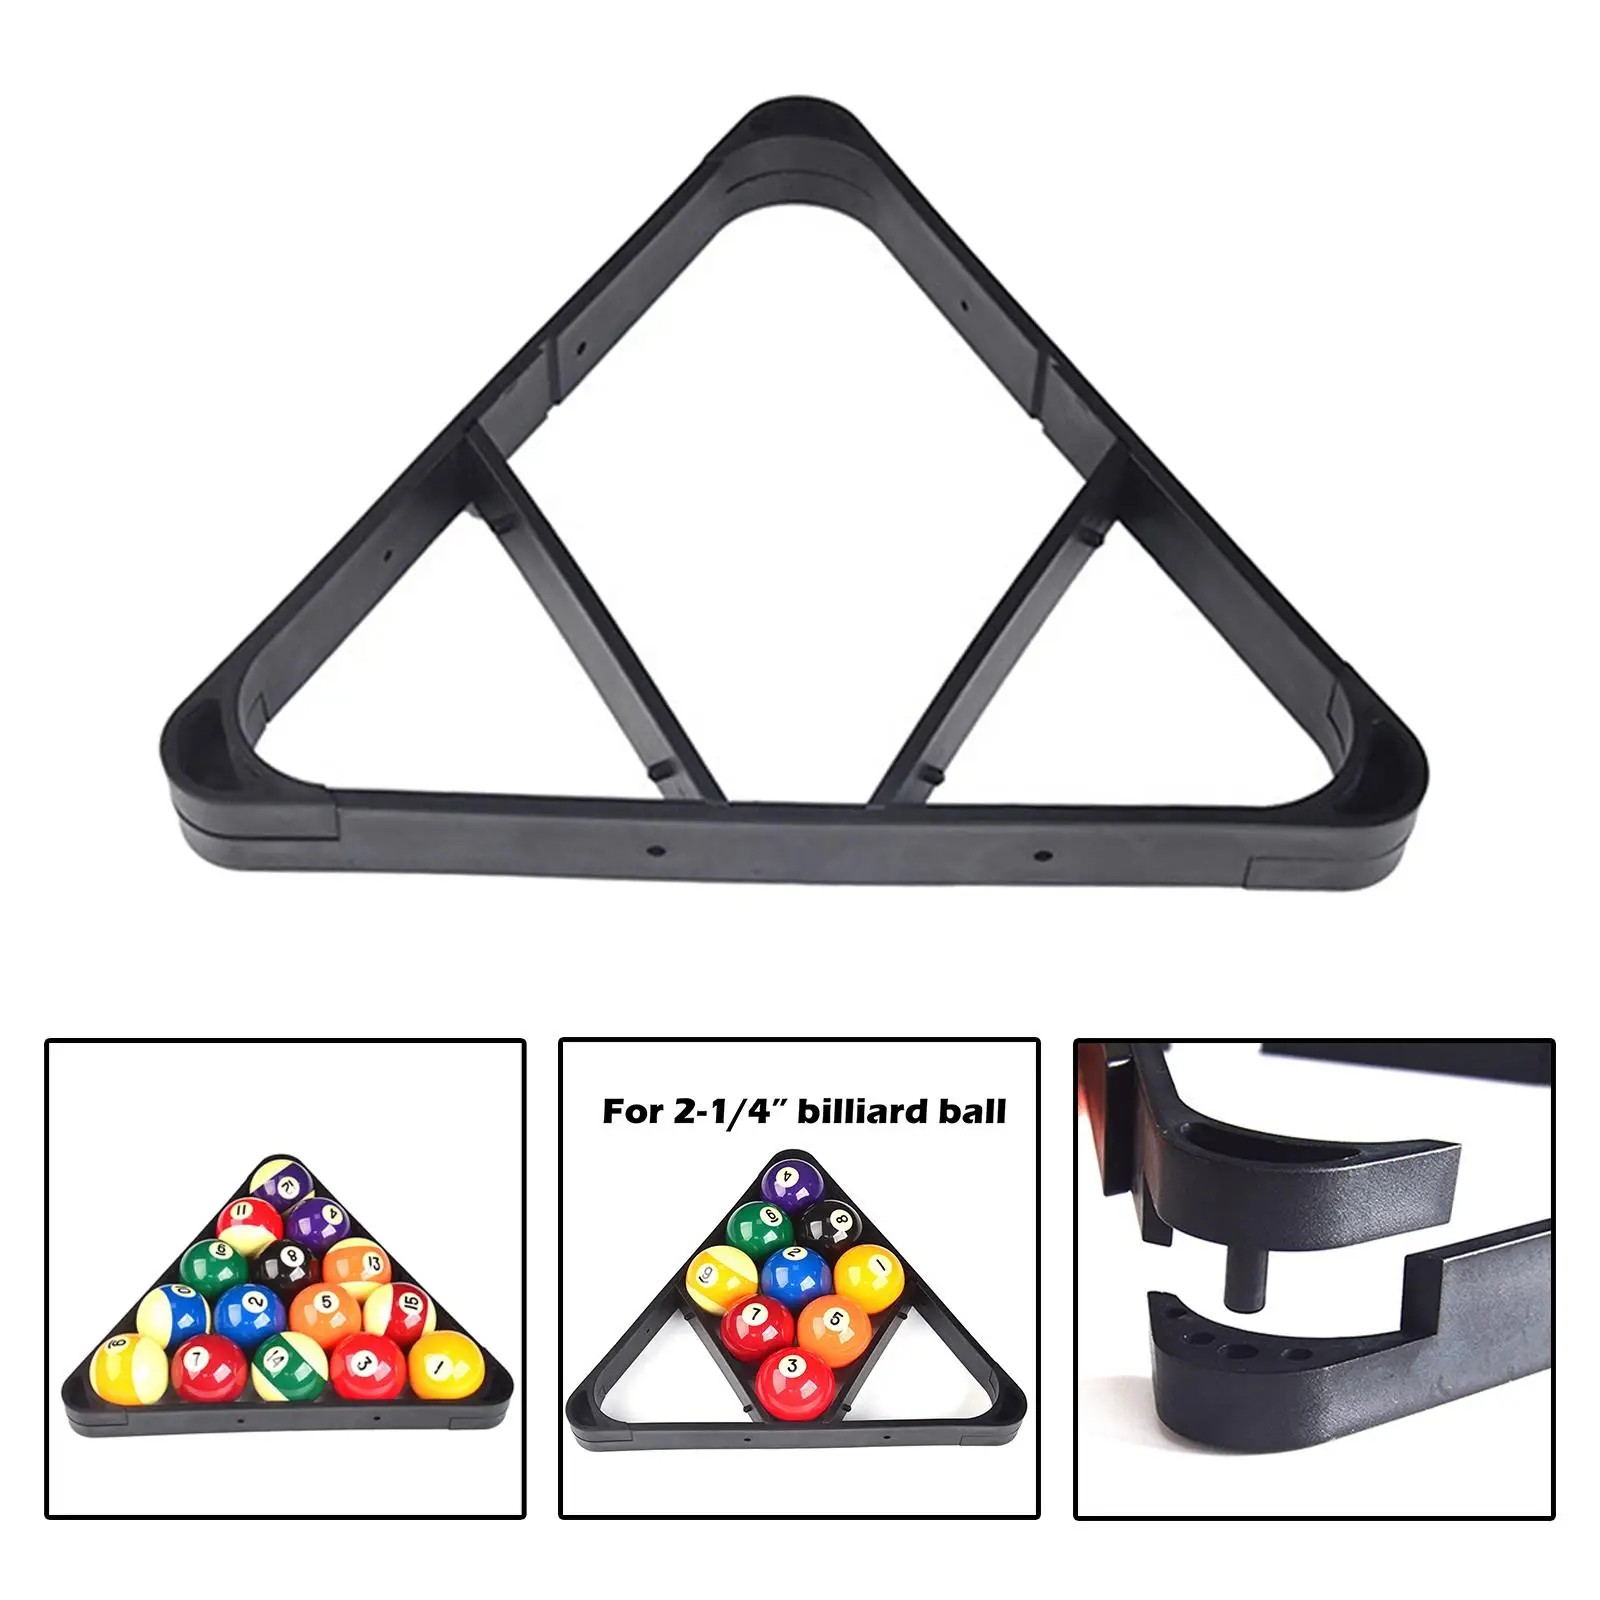 2 in 1 Billiard Triangle Ball Rack Holder Positioning Frames Pool Table Tool